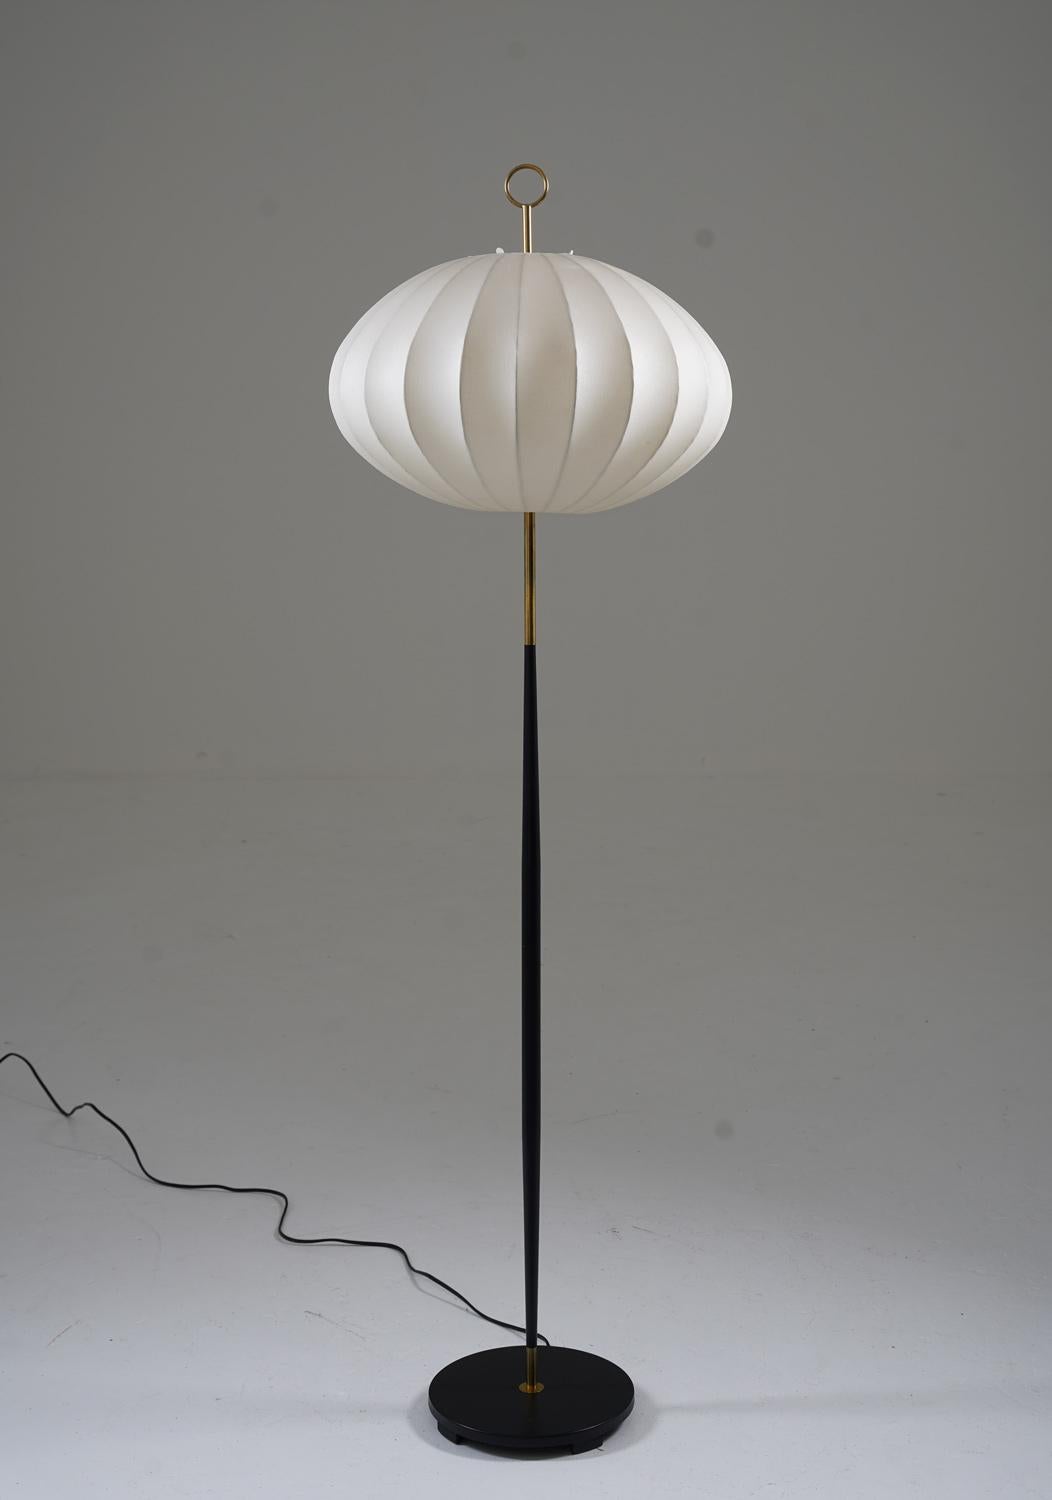 Stunning Floor lamp by ASEA, Sweden, 1950s.
Beautiful lamp with a minimalistic design with beautiful details. The base has its original black paint and is in near mint condition. The light source is hidden by a spray-plastic shade, spreading a